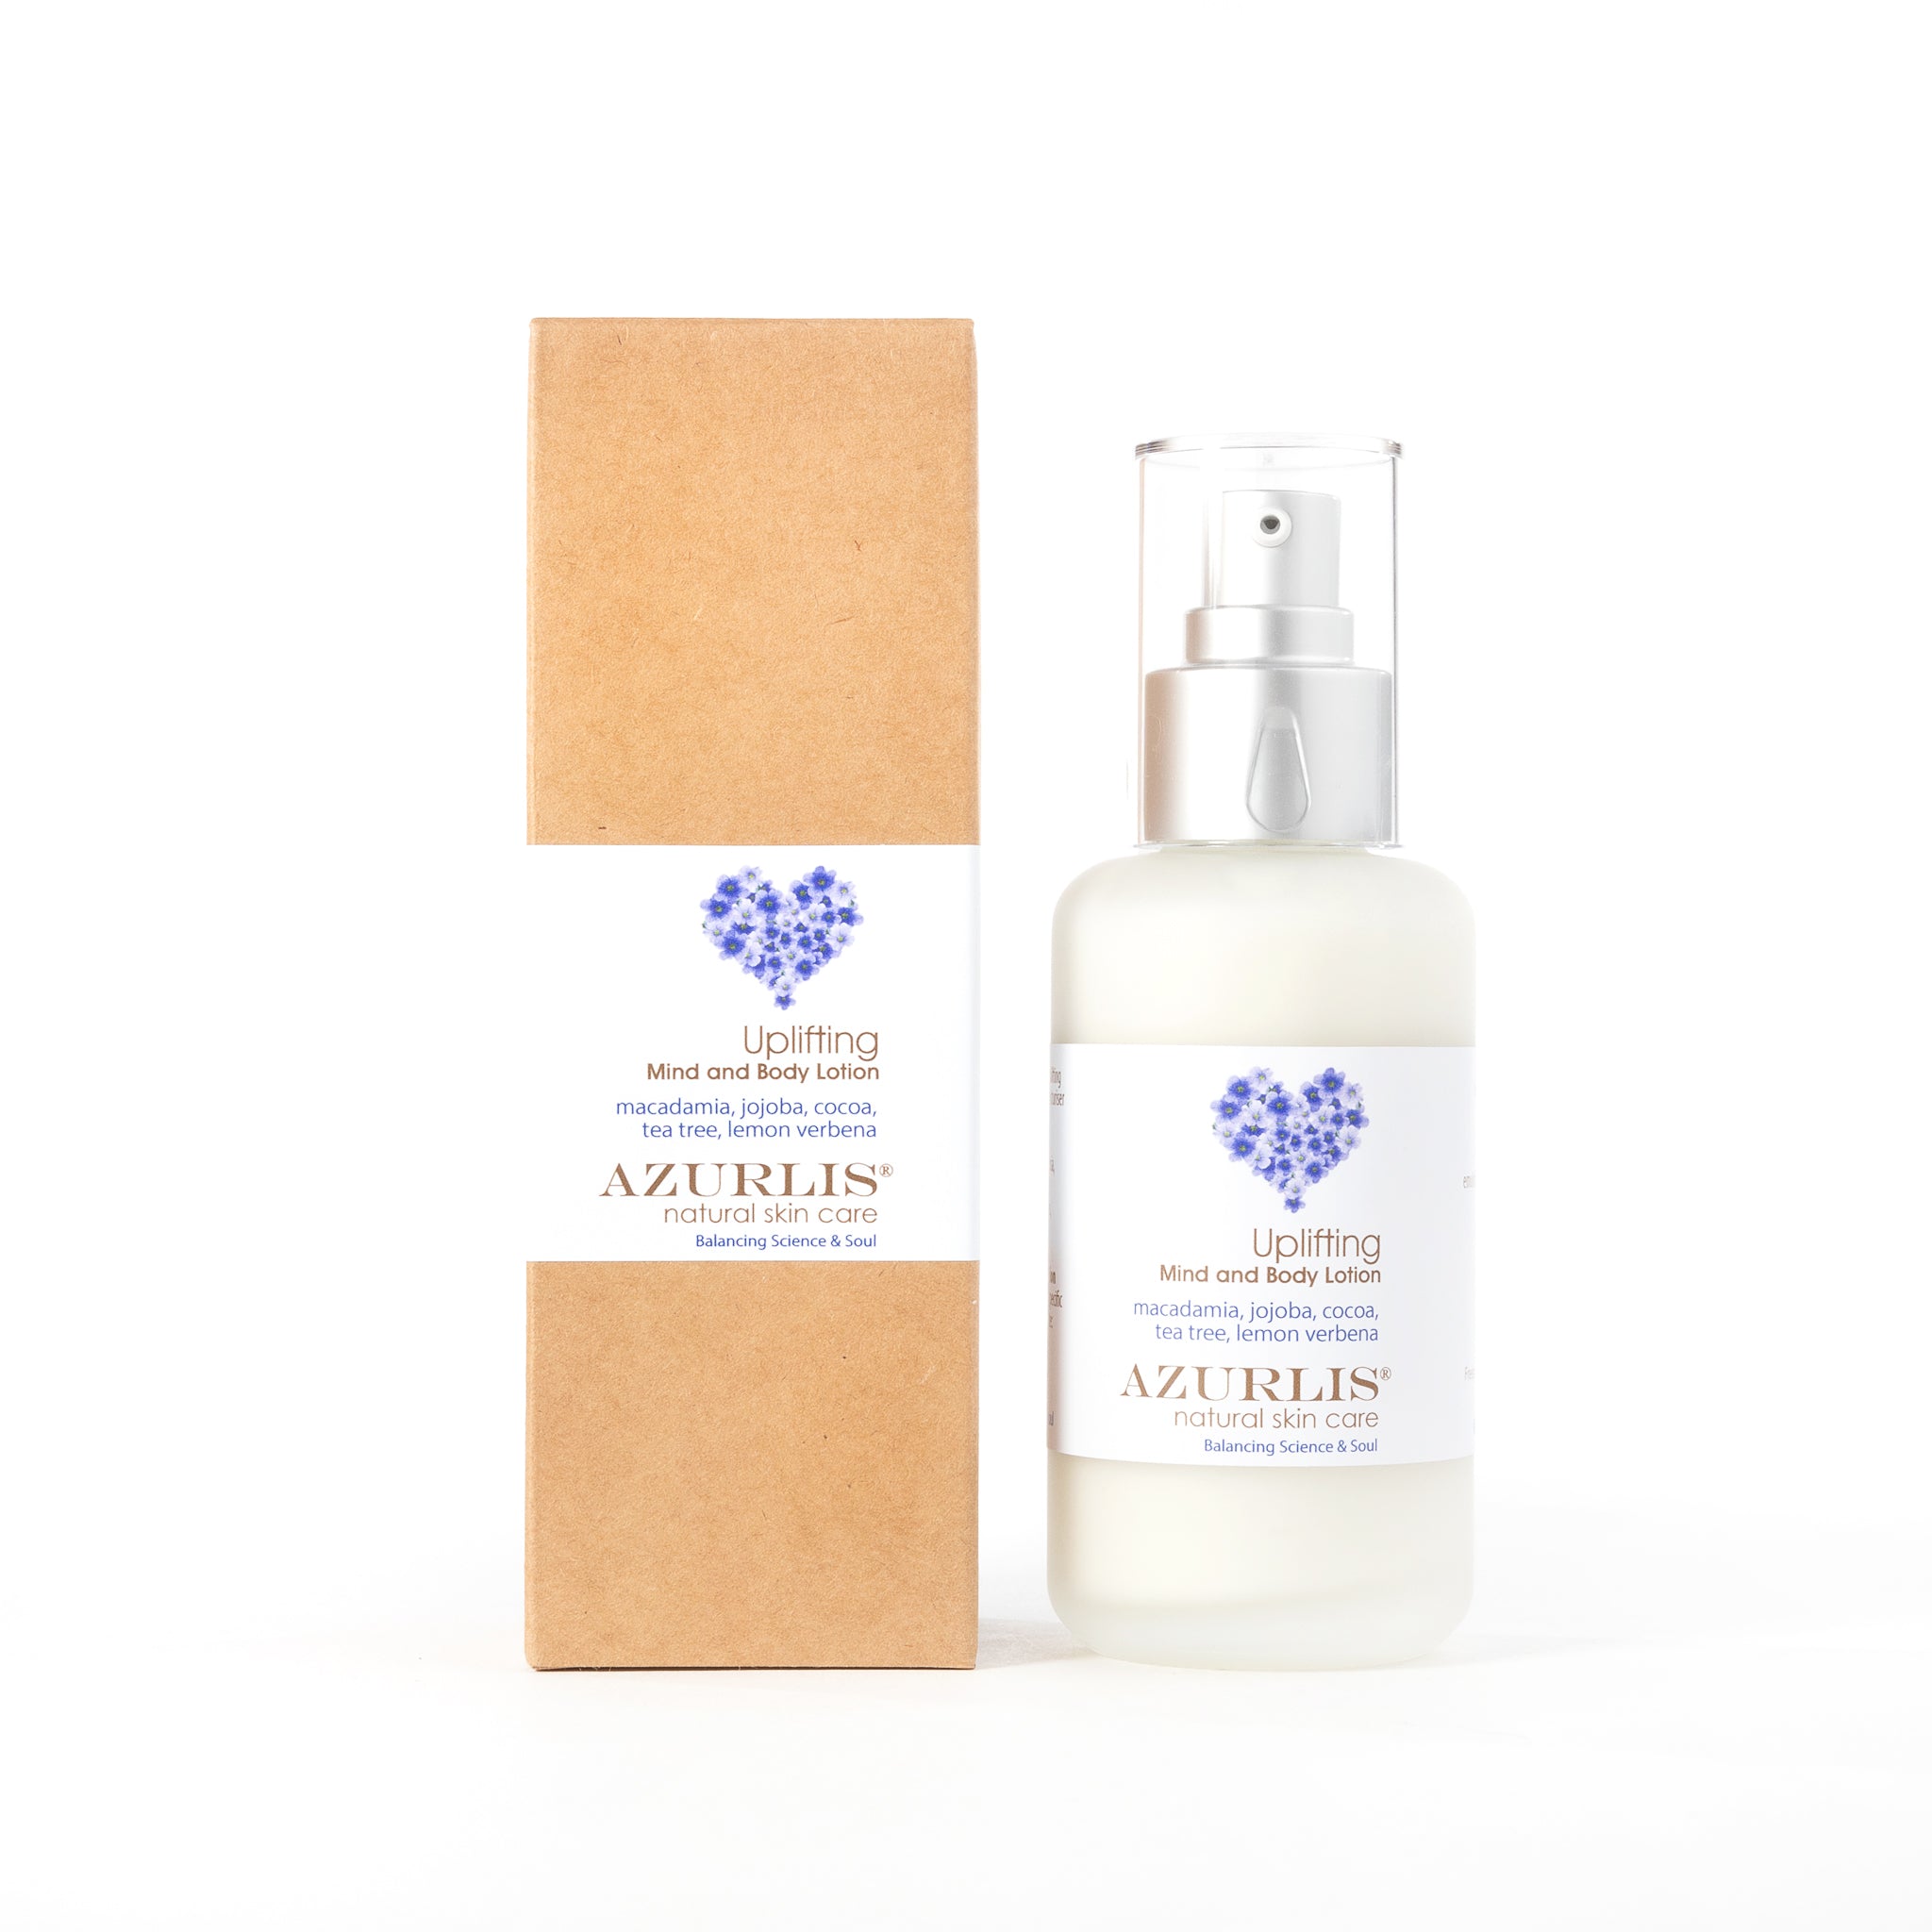 Azurlis™ Uplifting Mind & Body Lotion 100ml provides a wonderful medium to protect the skin all over your body, including dry, hard to soften skin and fine abrasions, especially on your hands and feet. The softening and emollient properties of macadamia nut and jojoba oils are ideal to make your skin feel wonderfully moisturised and soft. NZ tea tree and lemon verbena essential oils are also shielding due to their mild antiseptic properties.